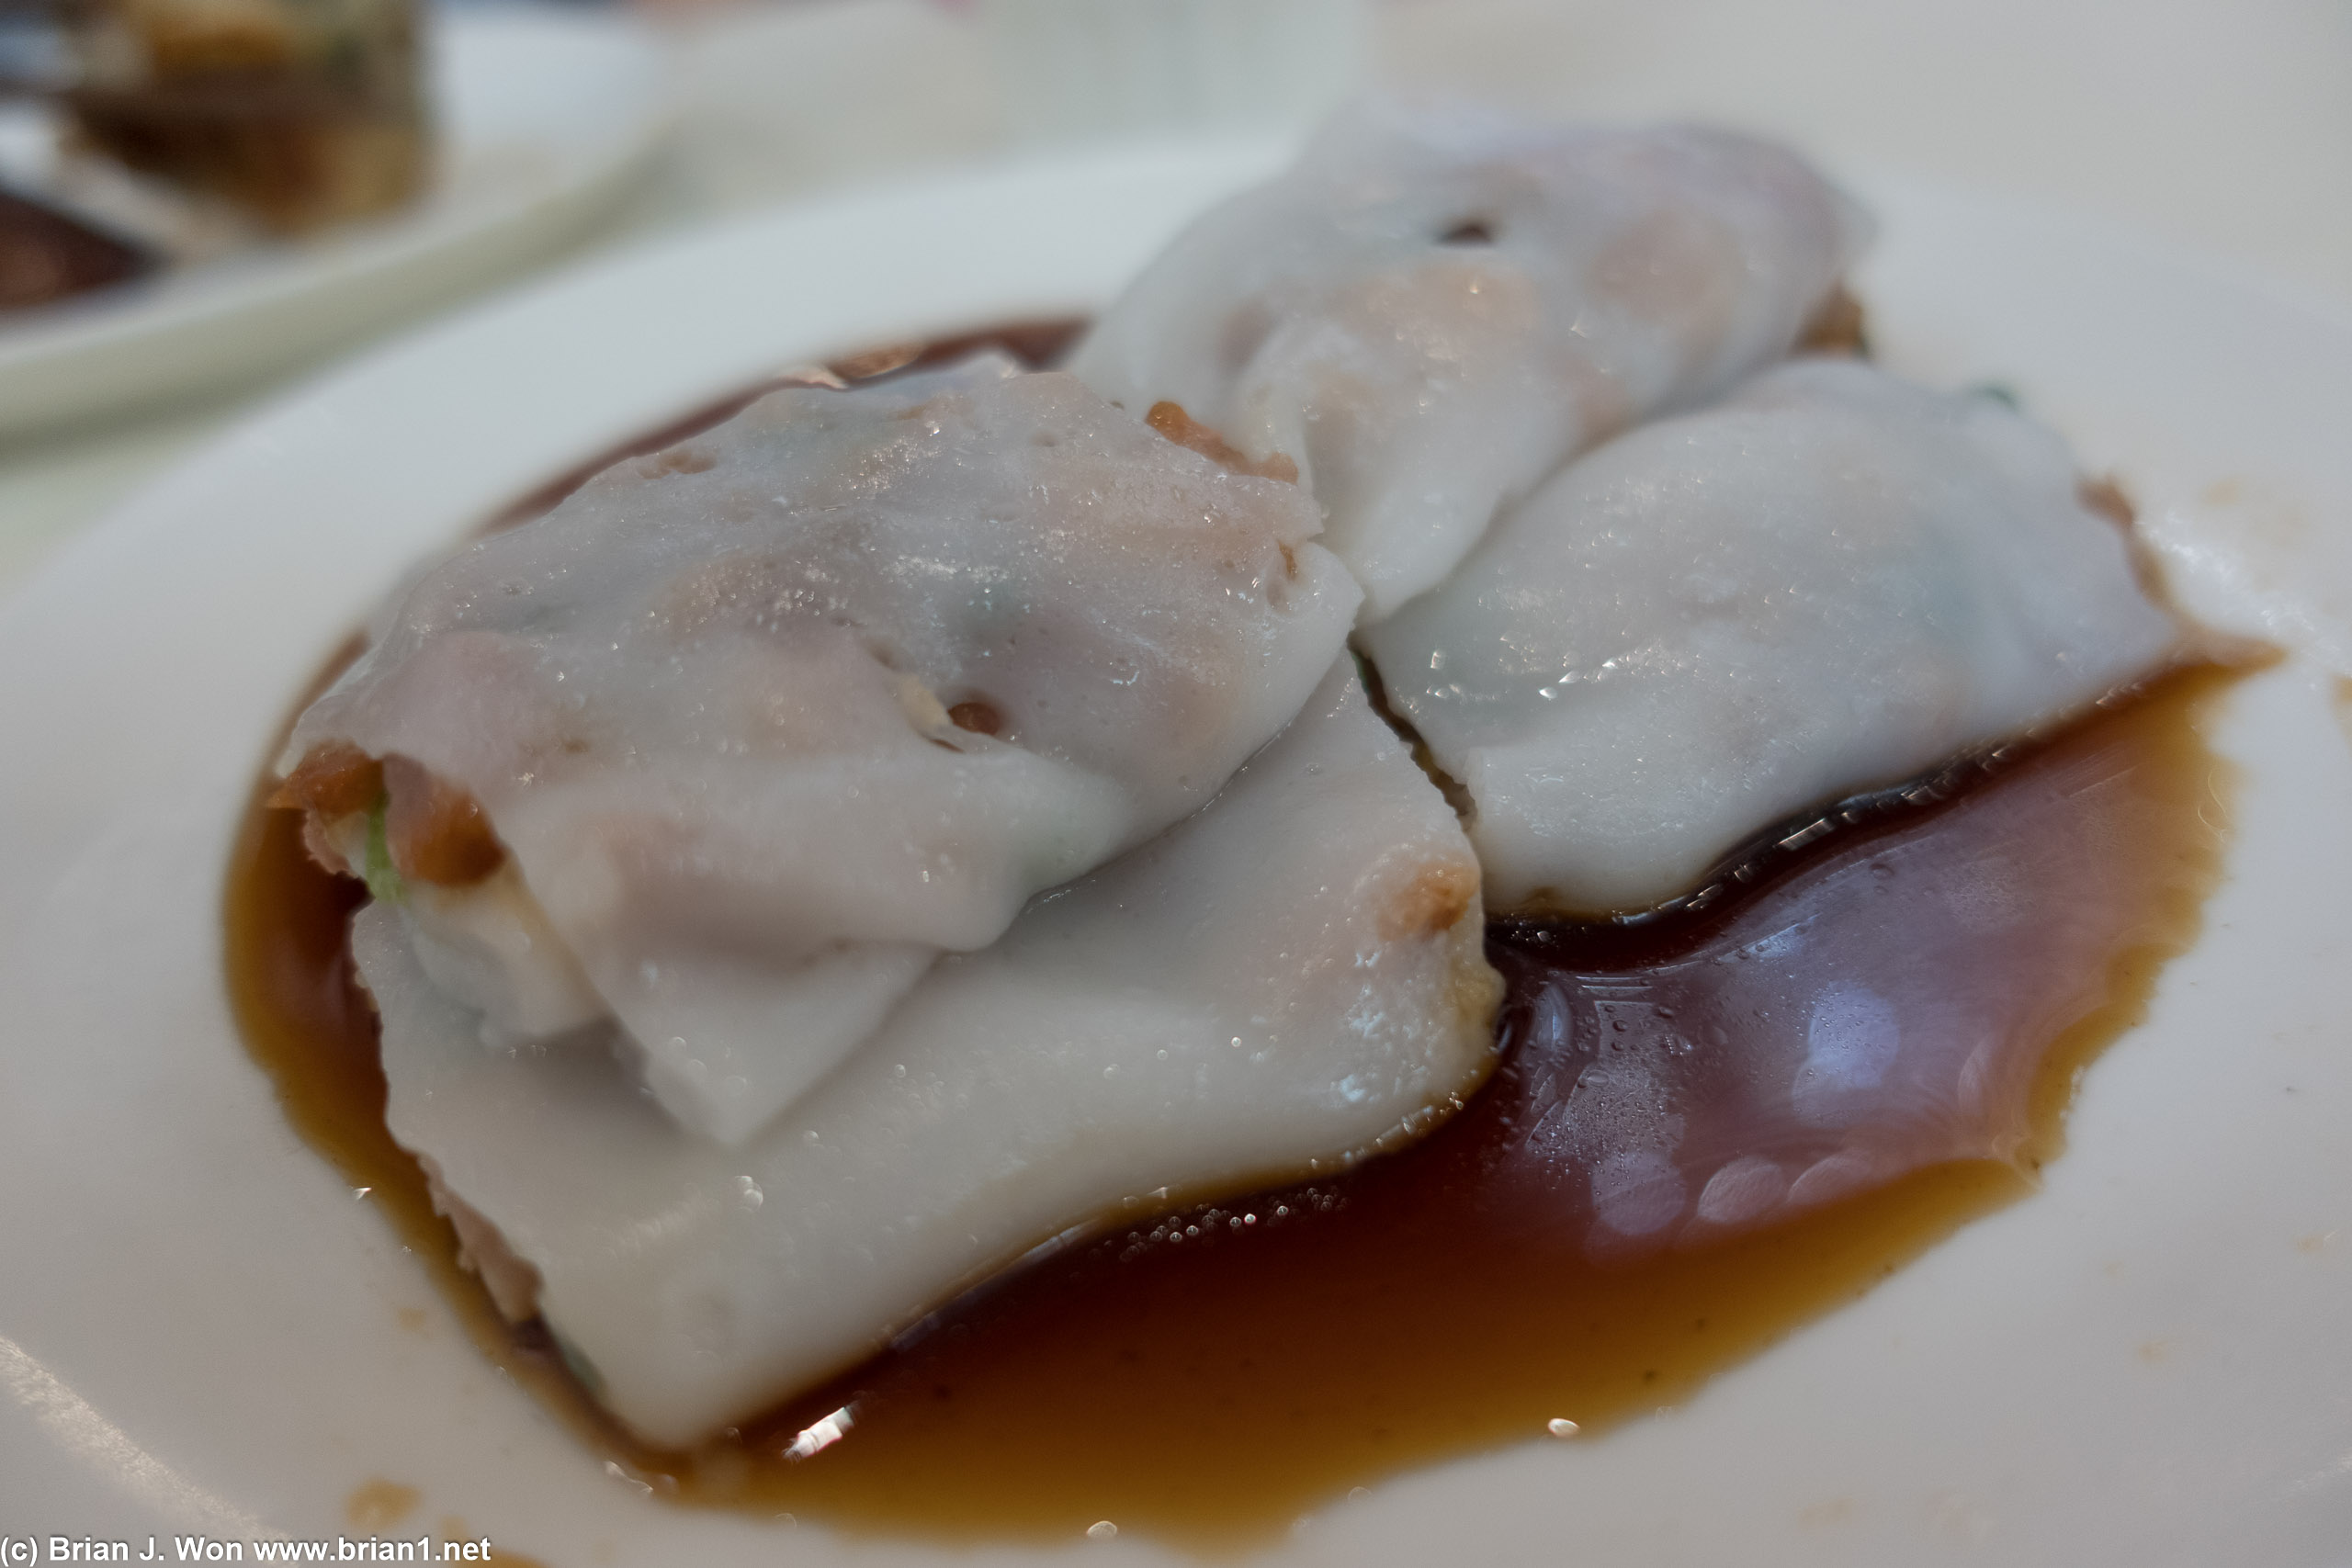 Char shu cheung fun, because they had (momentarily) ran out of har cheung fun.